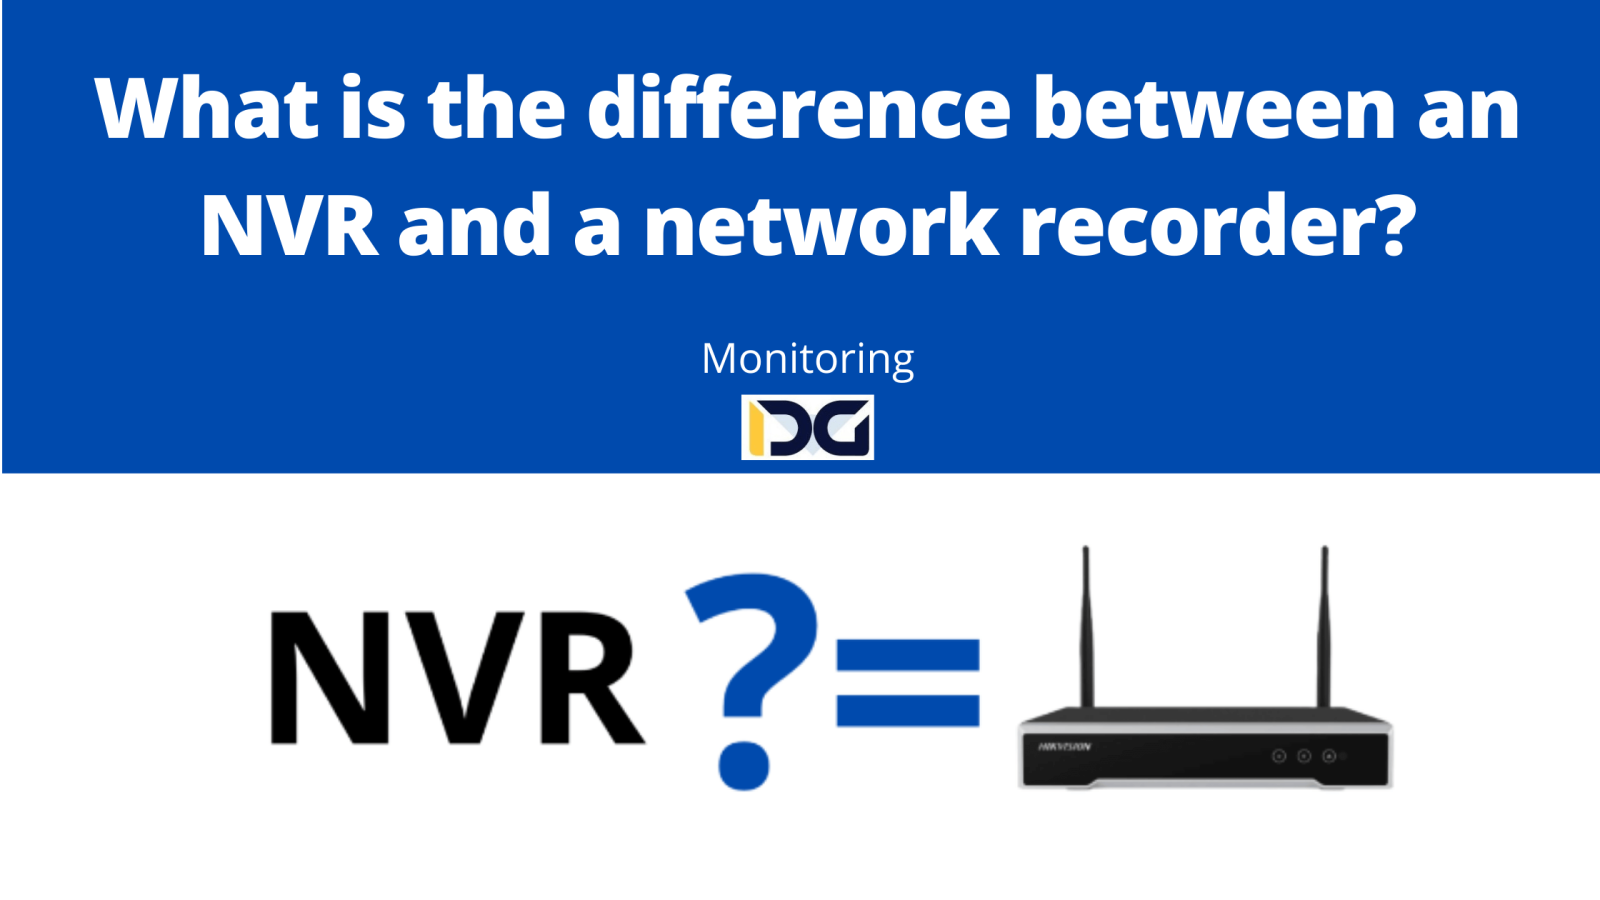 What is the difference between an NVR and a network recorder?